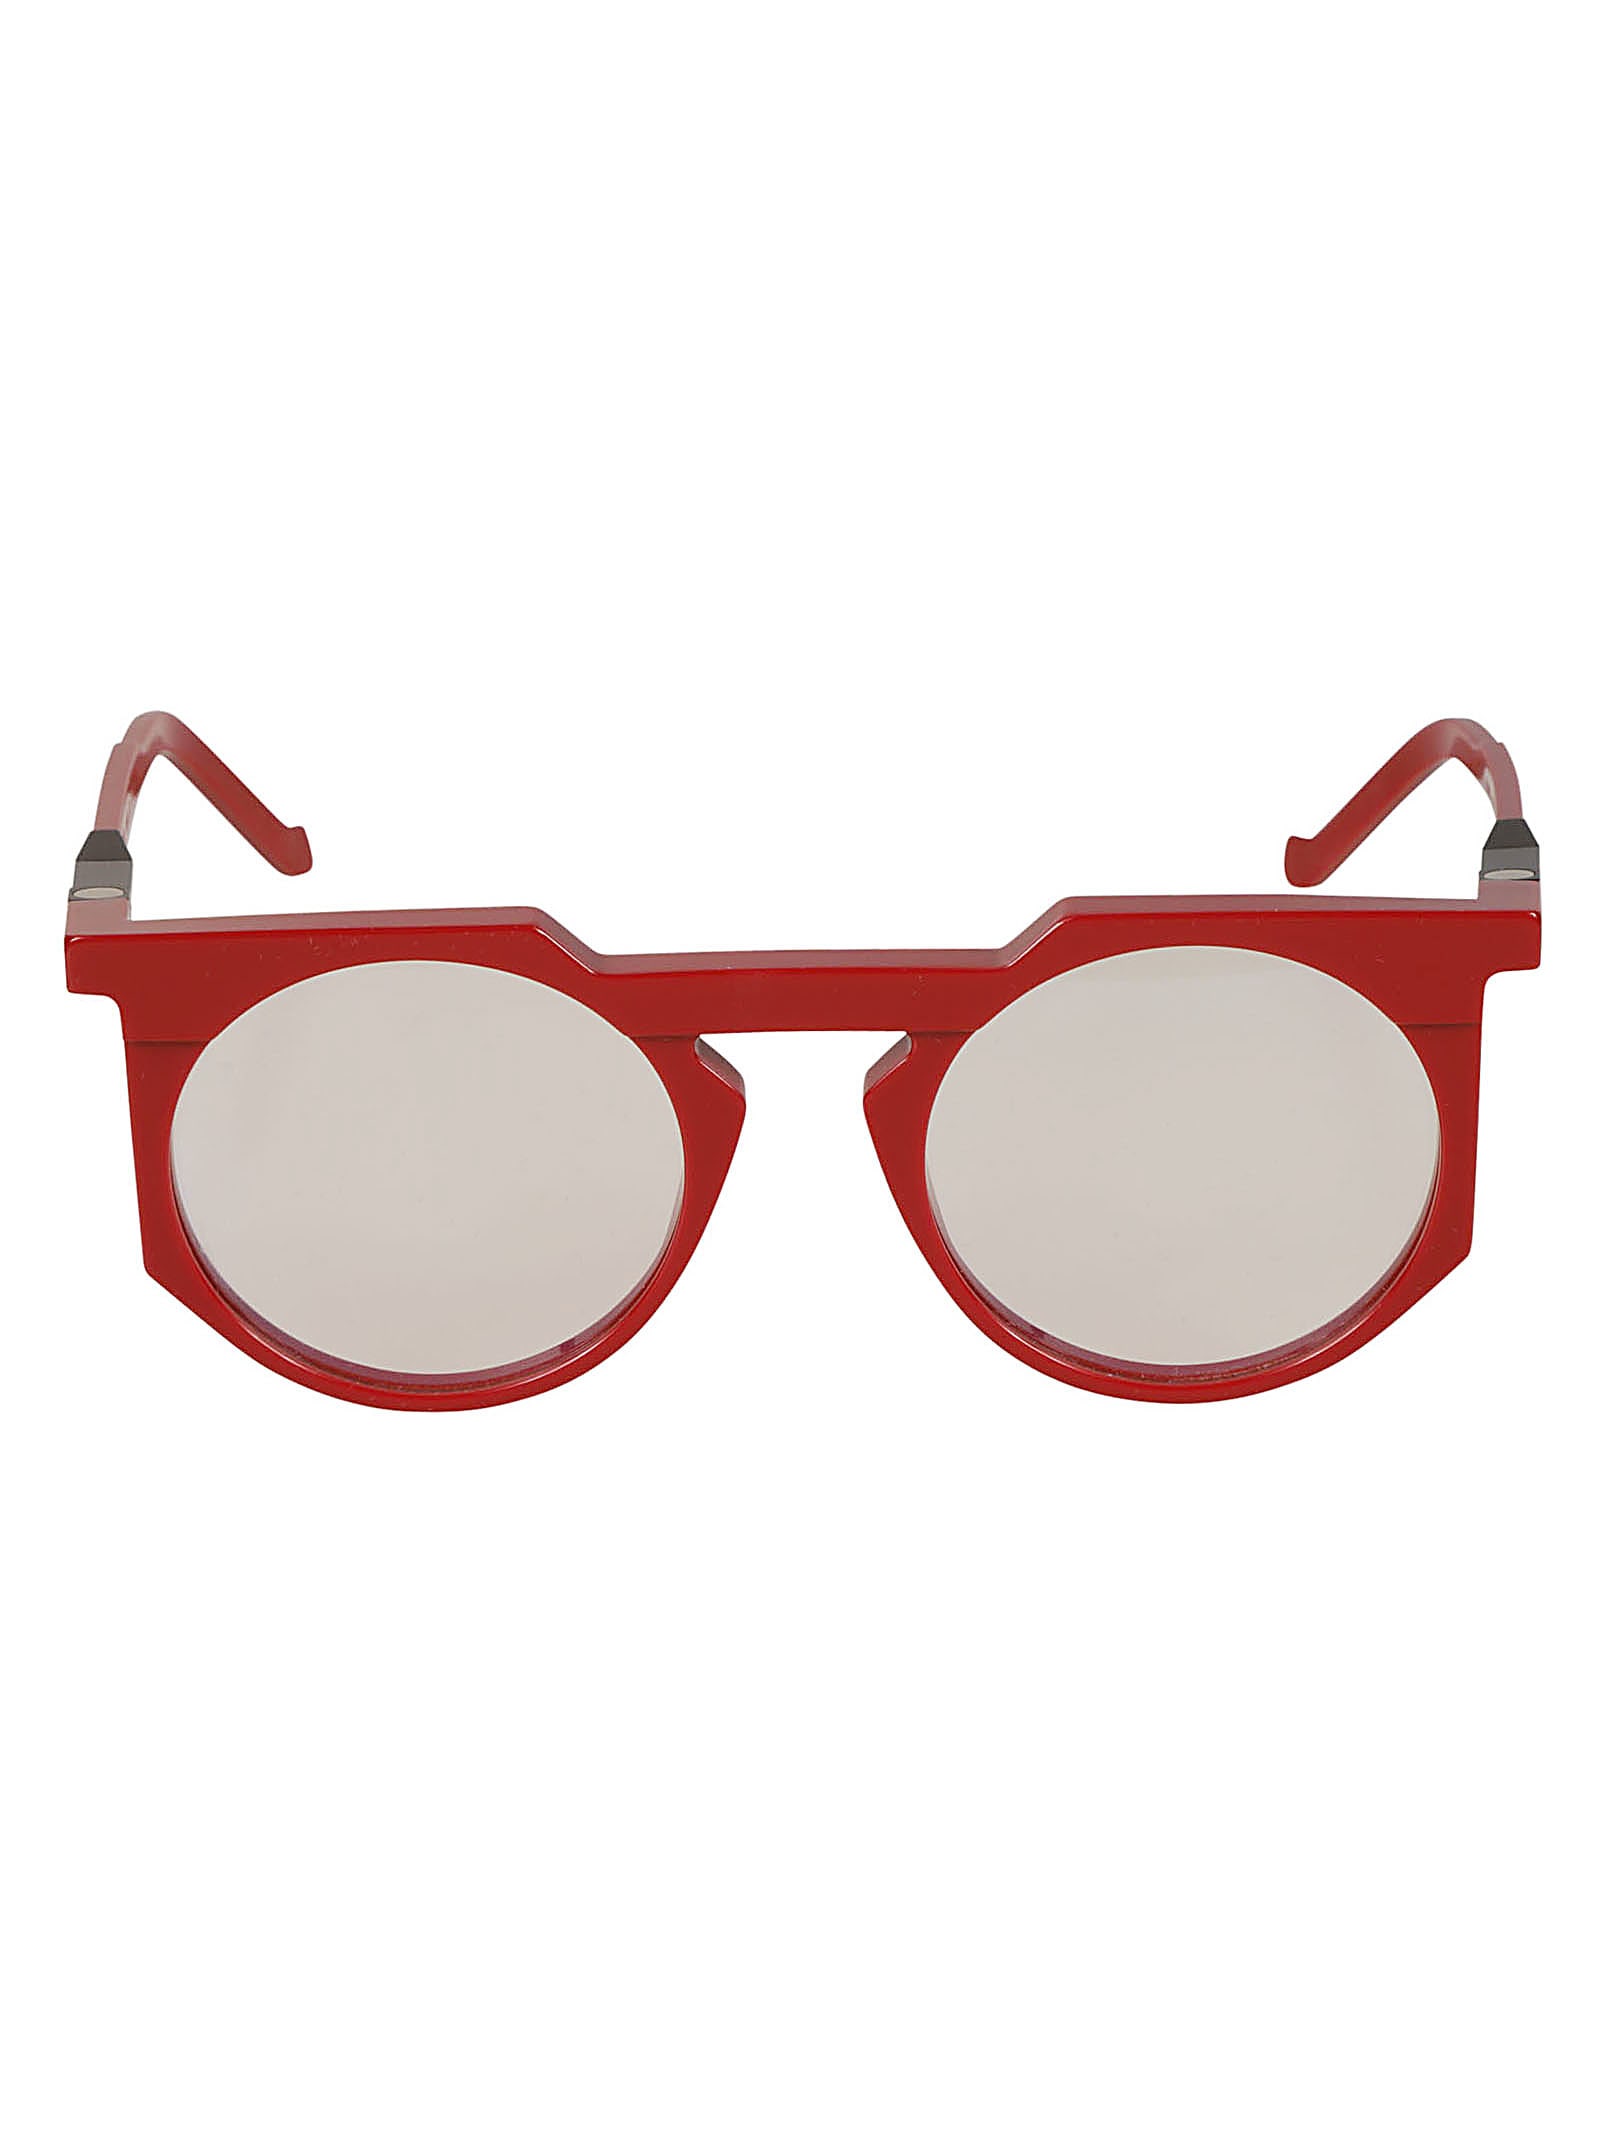 Vava Clear Lens Round Frame Glasses Glasses In Red